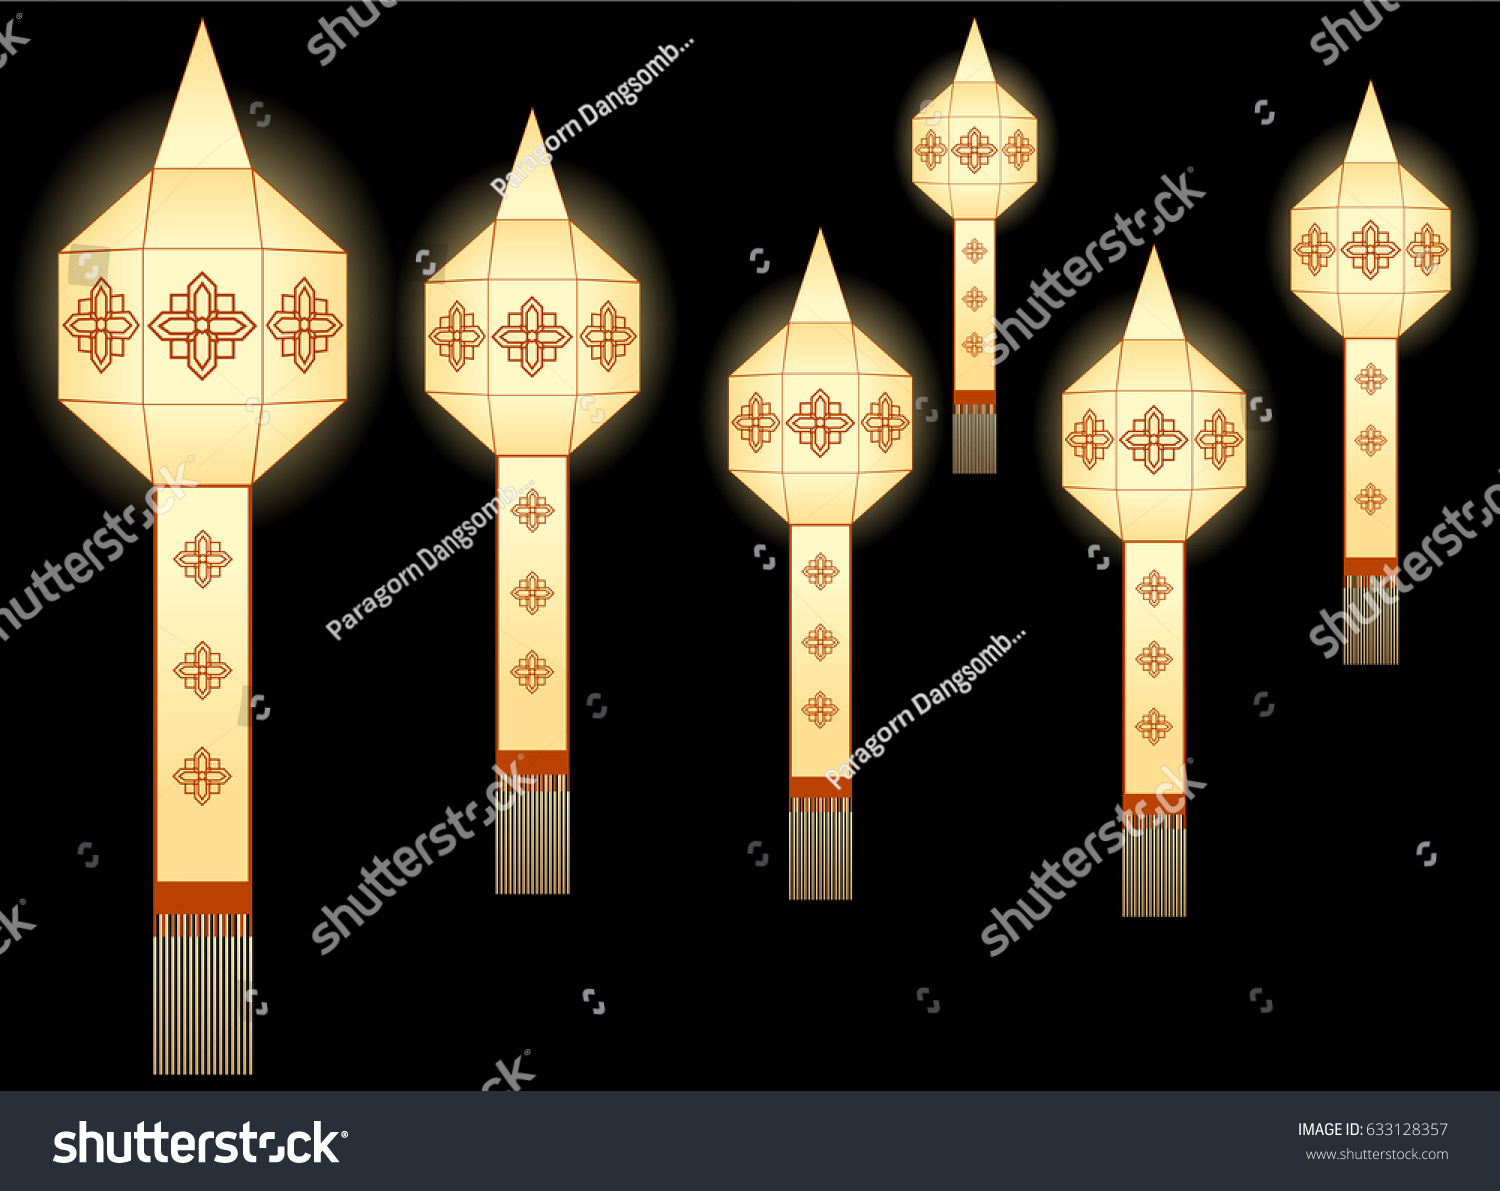 SVG of Northern thai style paper lamp lighting graphic vector
 svg